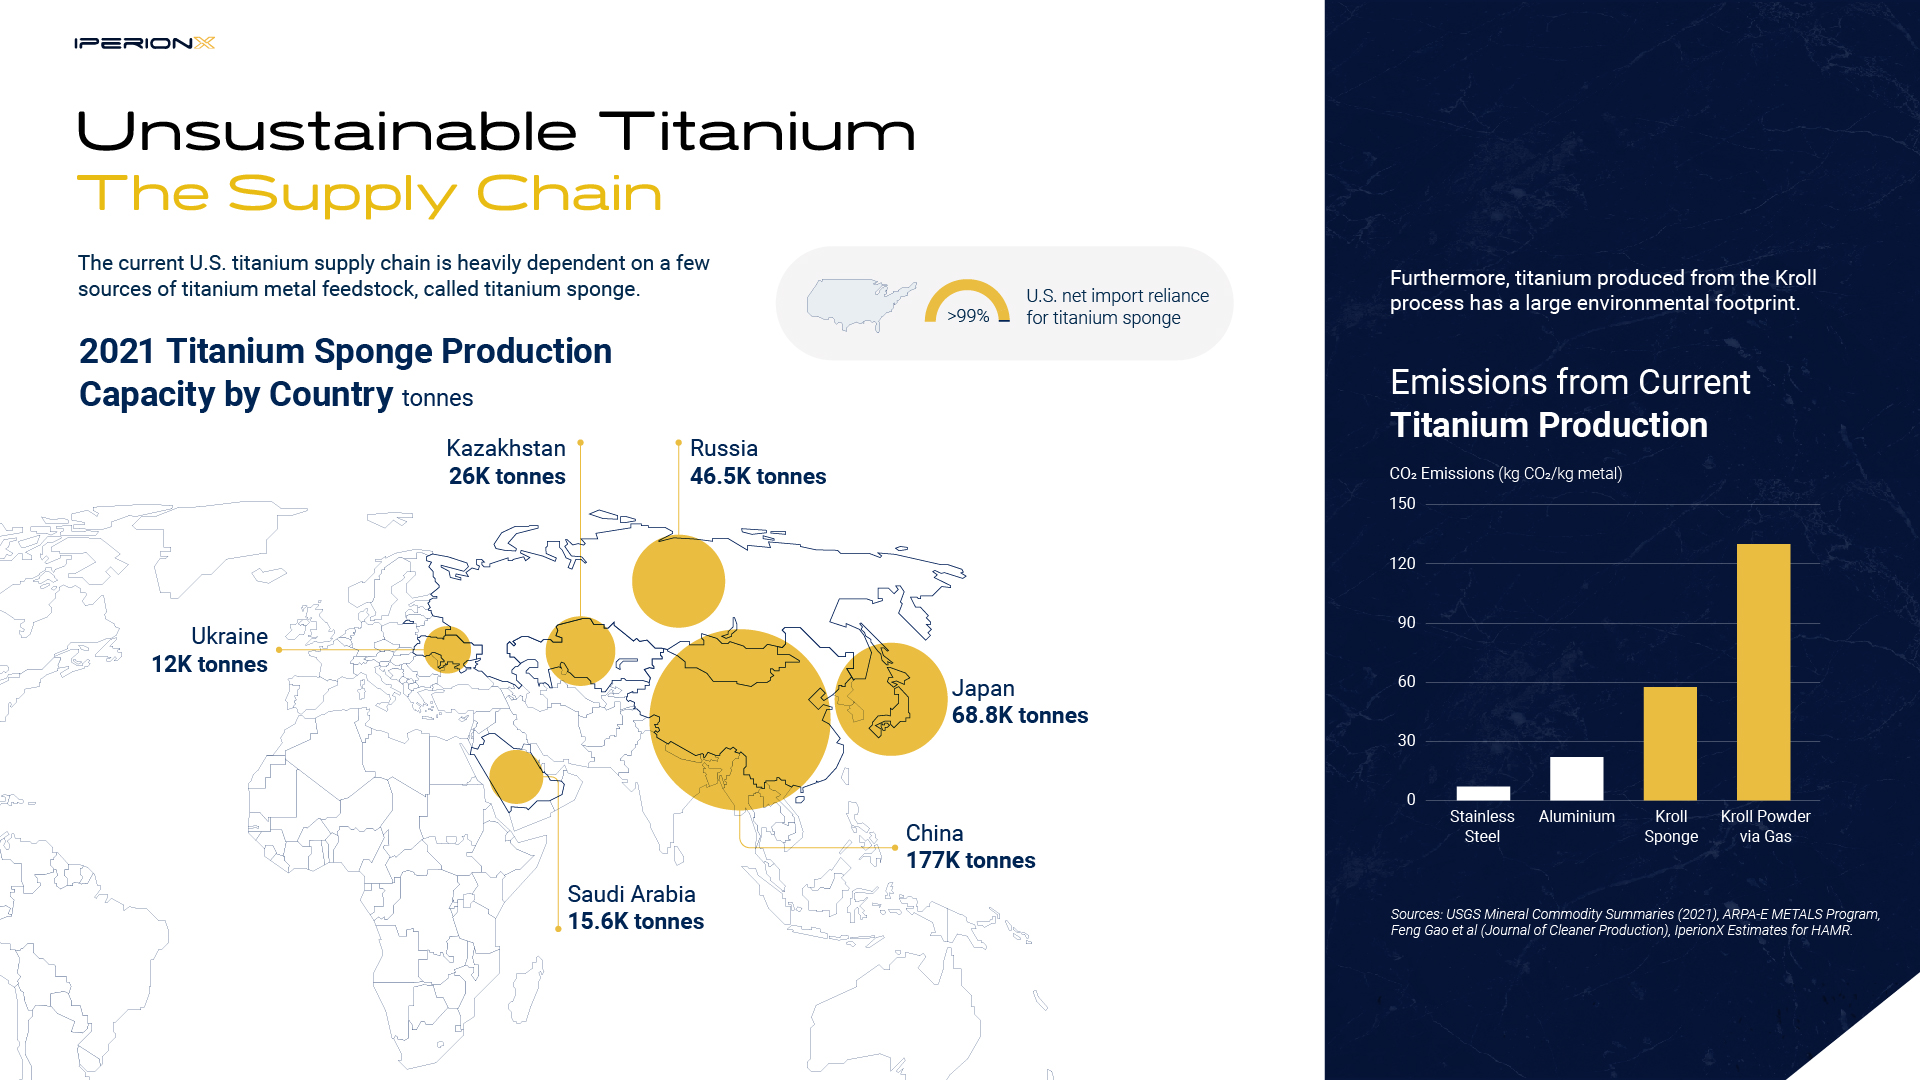 Map of titanium sponge production by country and chart showing the large environmental footprint of current titanium production.